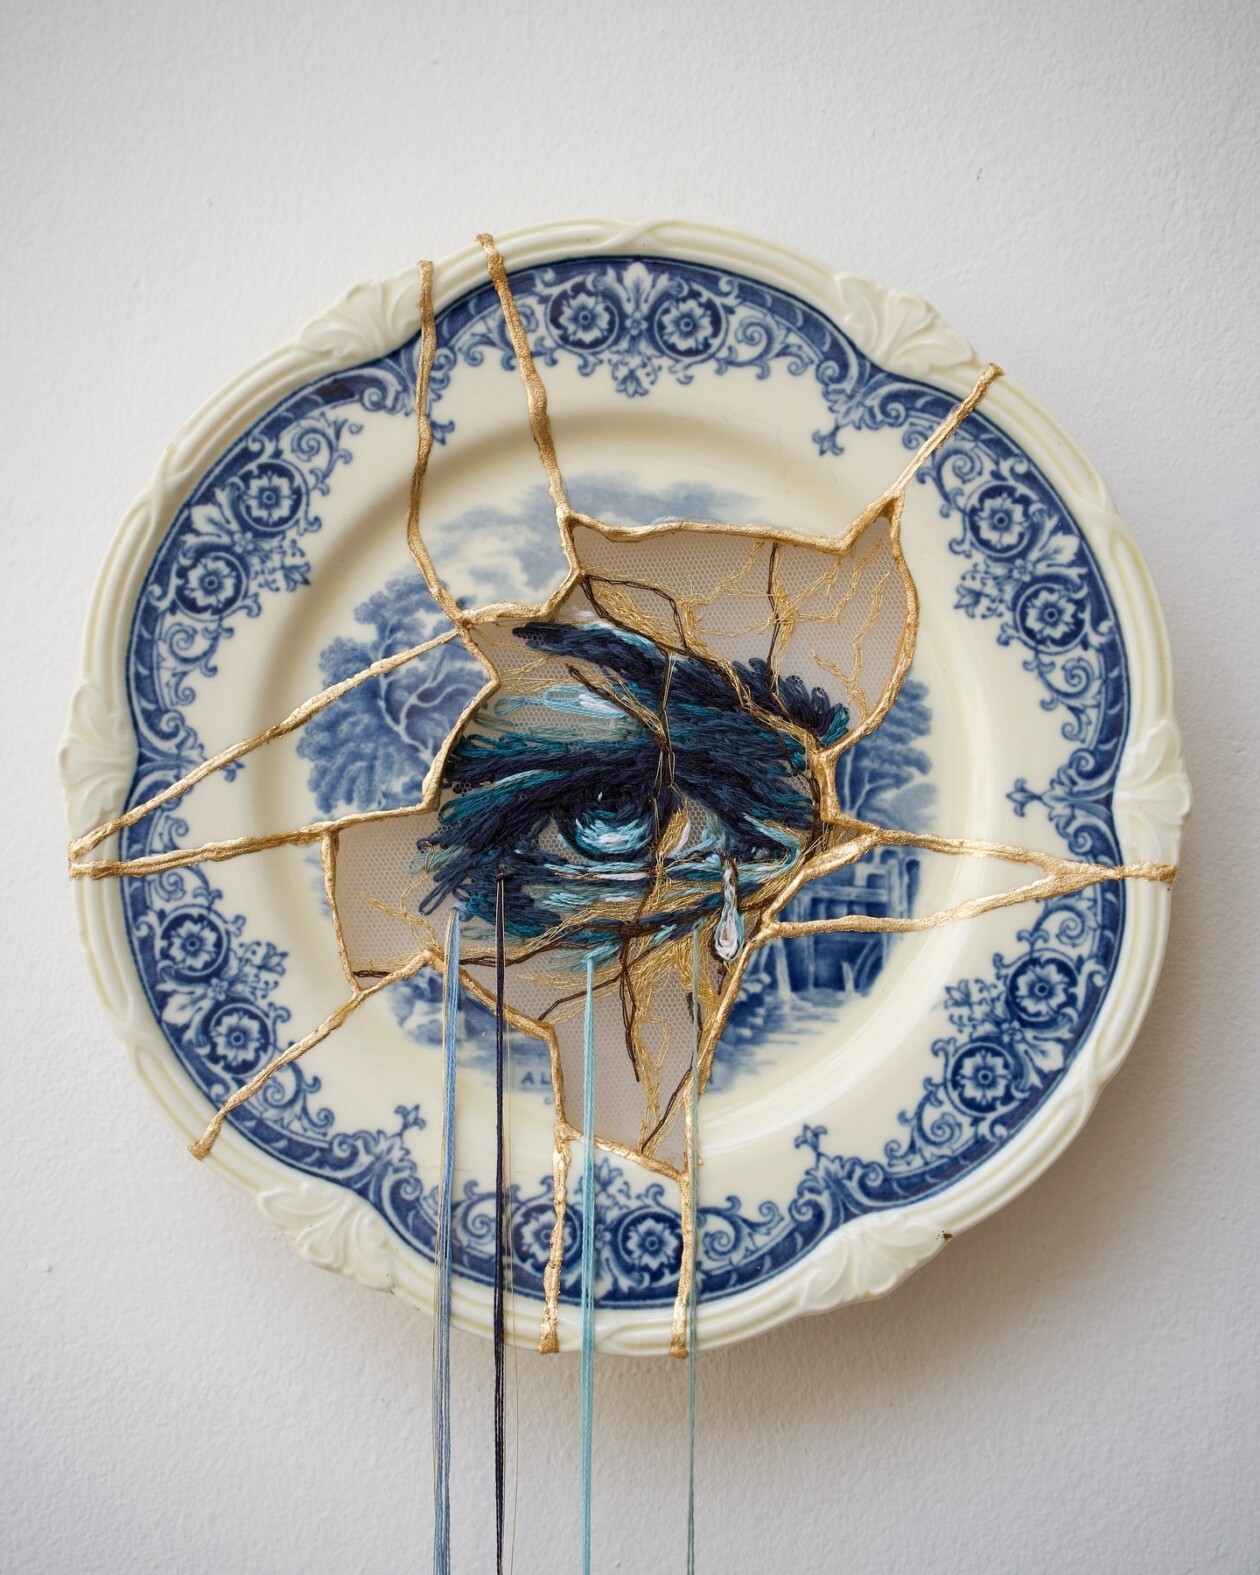 Embroidered Kintsugi, Delicate And Meaningful Mixed Media Artworks By Kathrin Marchenko (9)